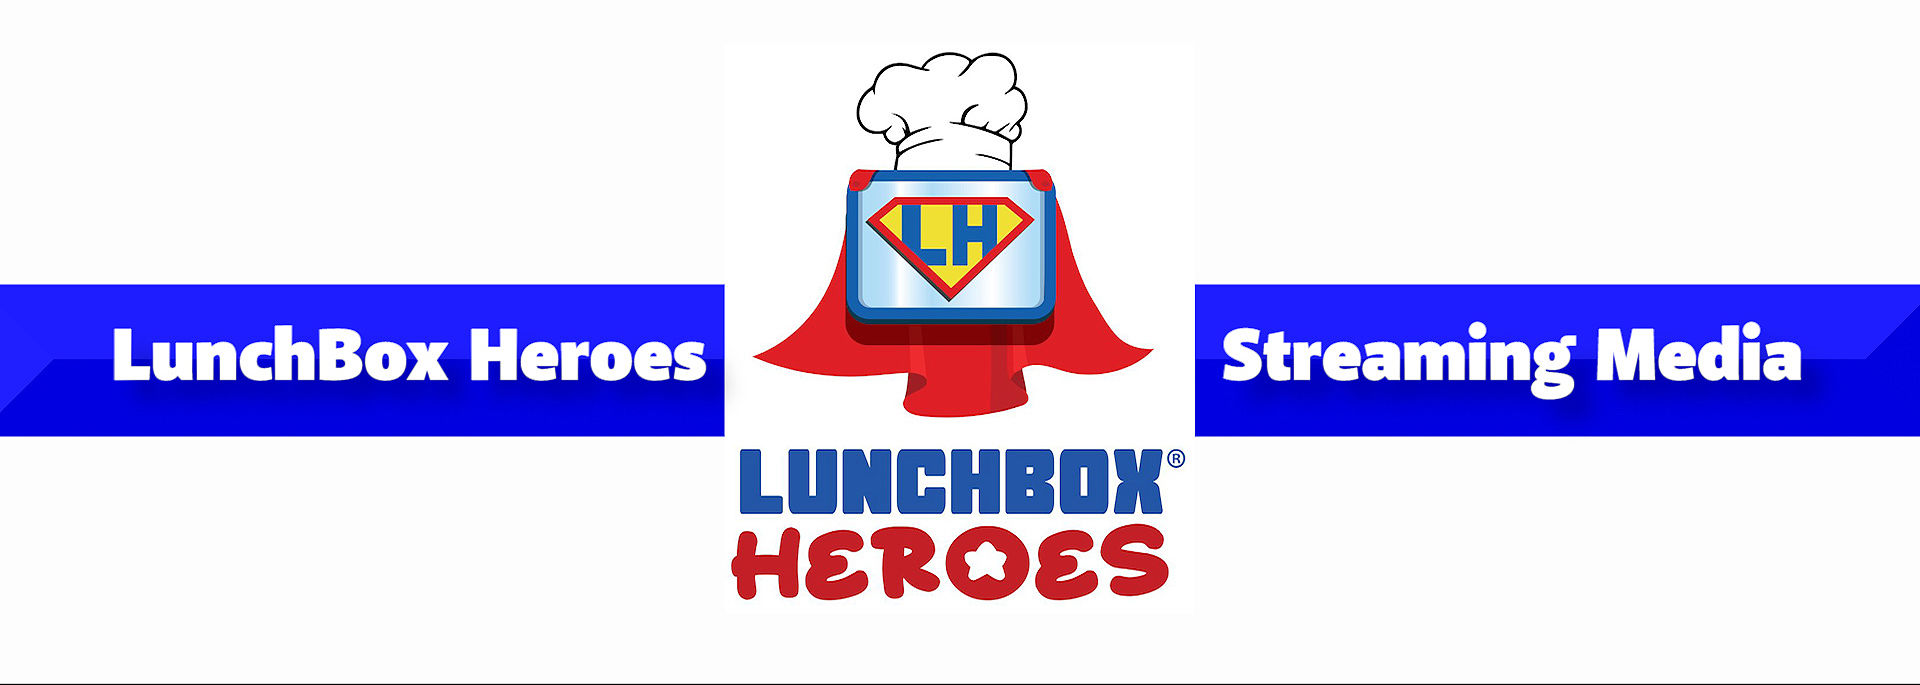 LUNCHBOX HEROES channel